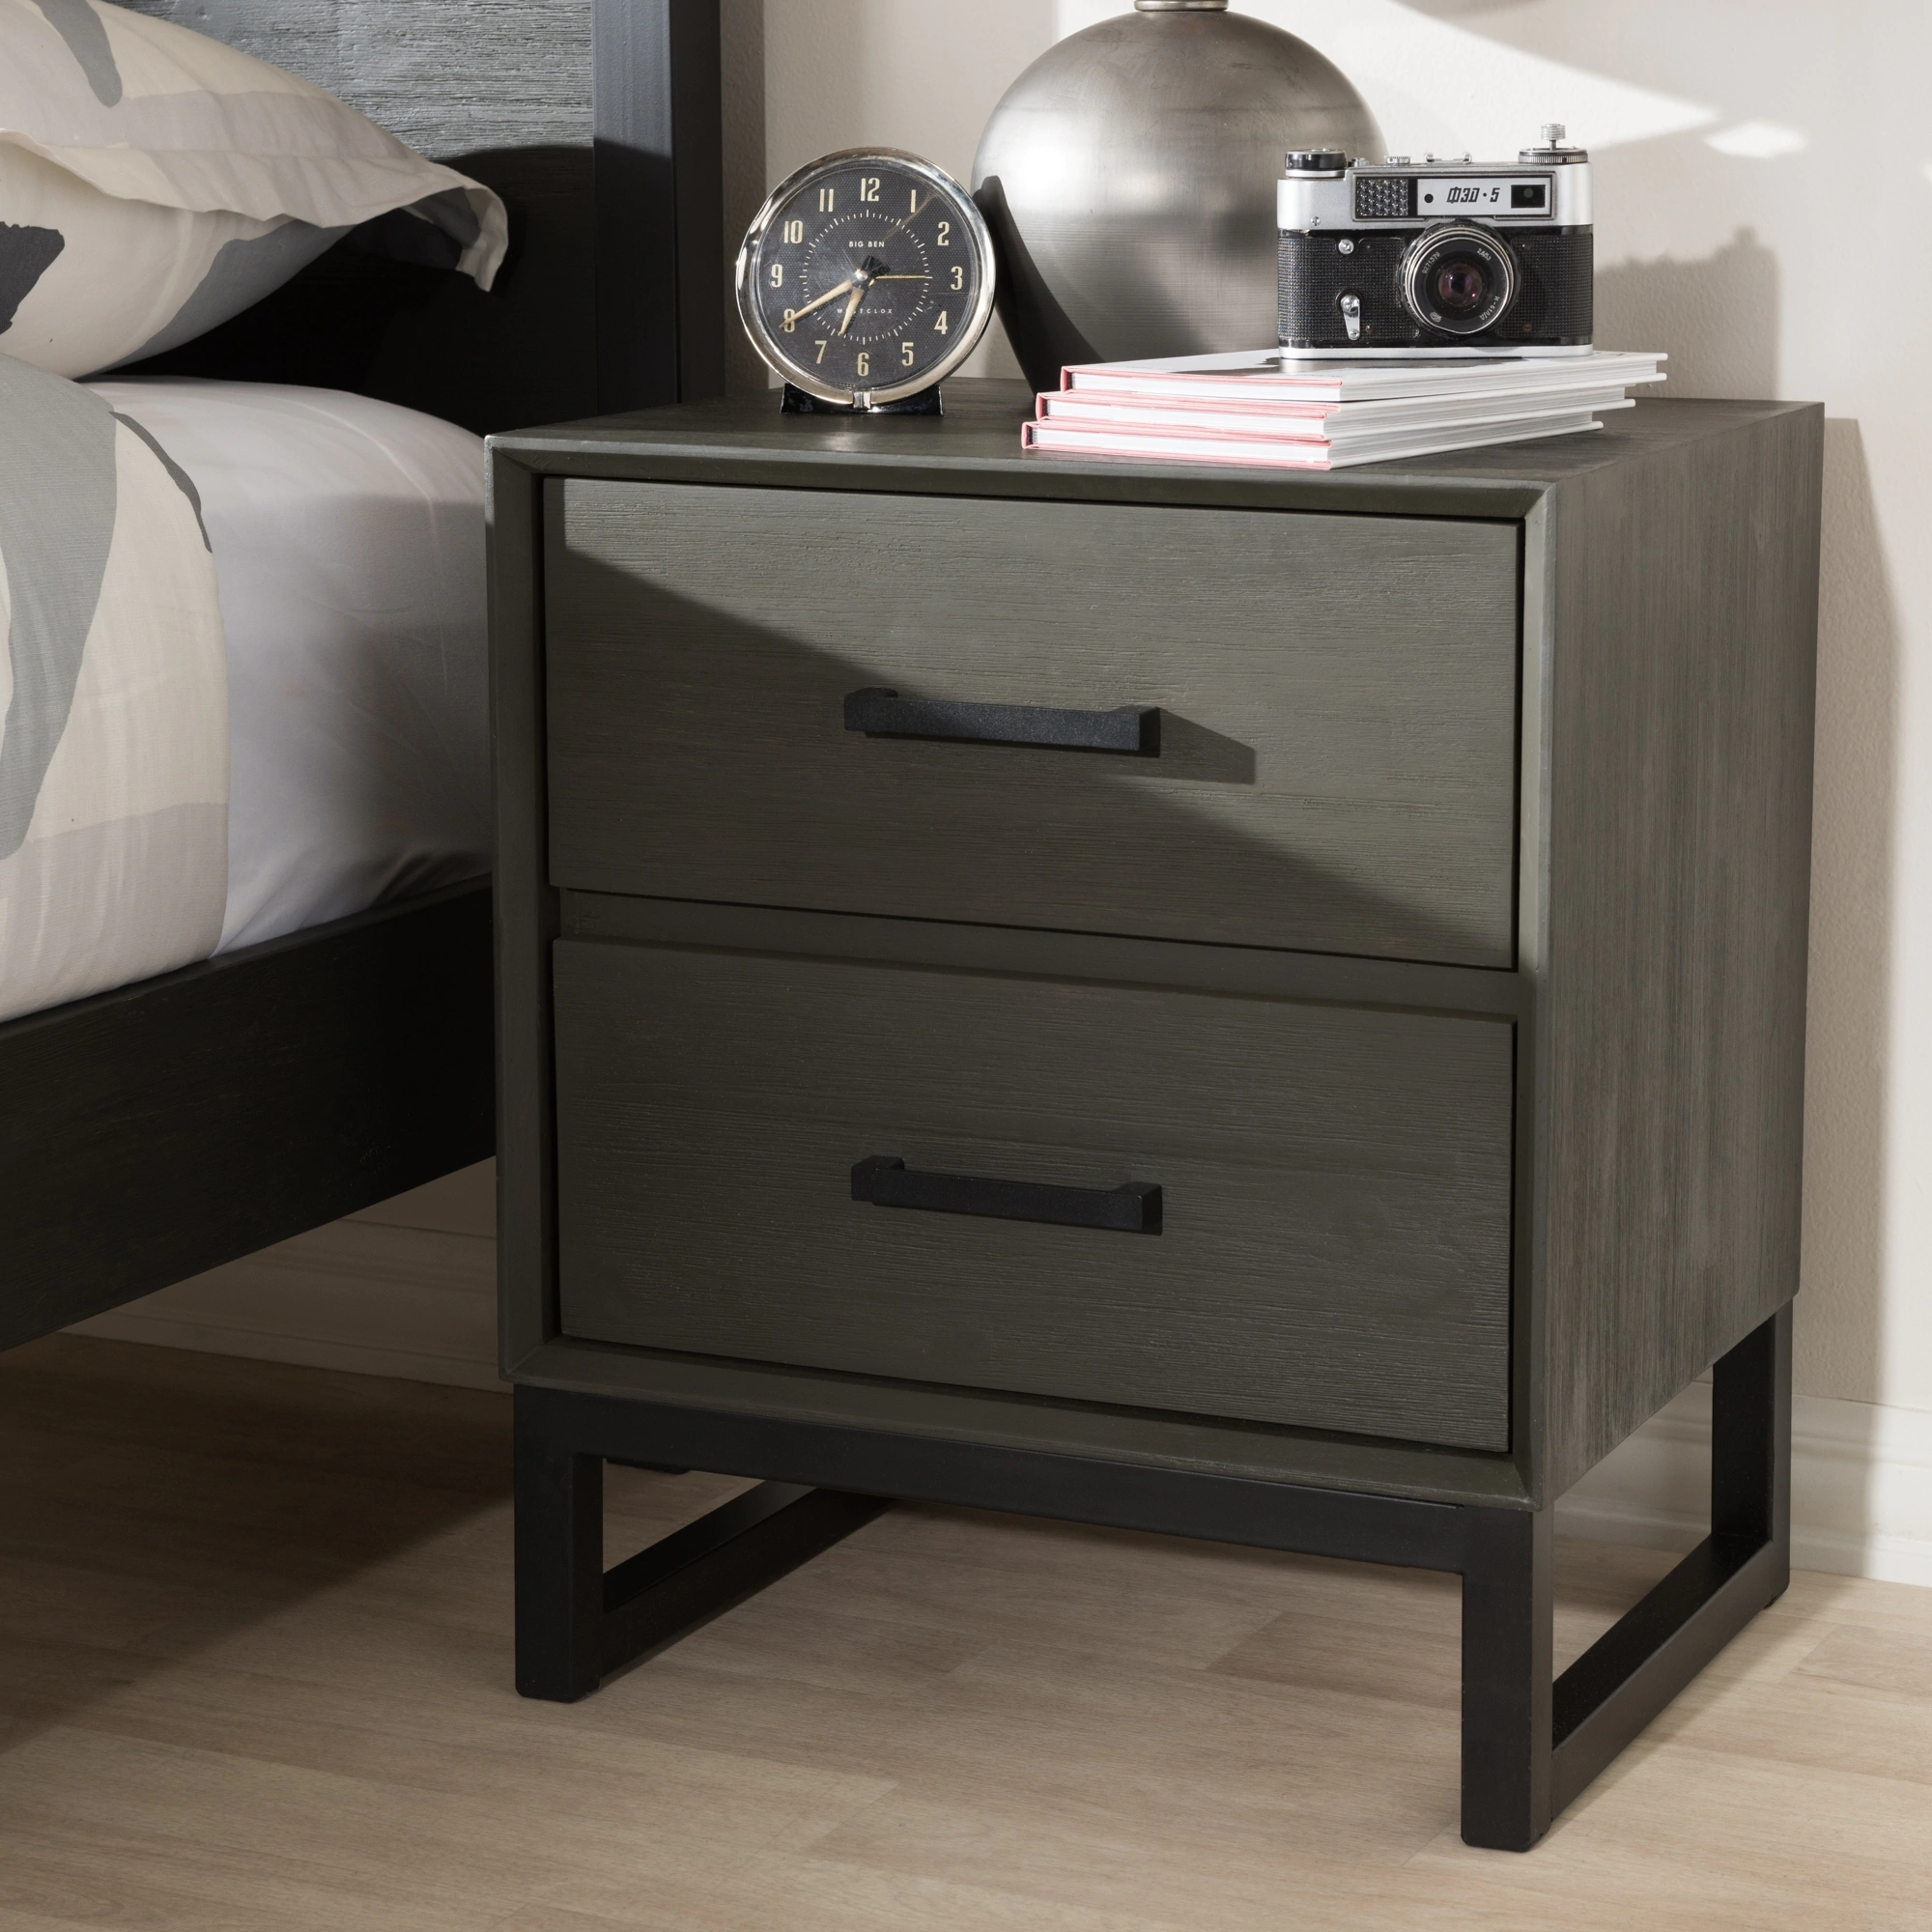 rustic grey wood and black metal drawer nightstand baxton studio room essentials patio accent table free shipping today mustard rug corner lamp cast aluminum set wade furniture